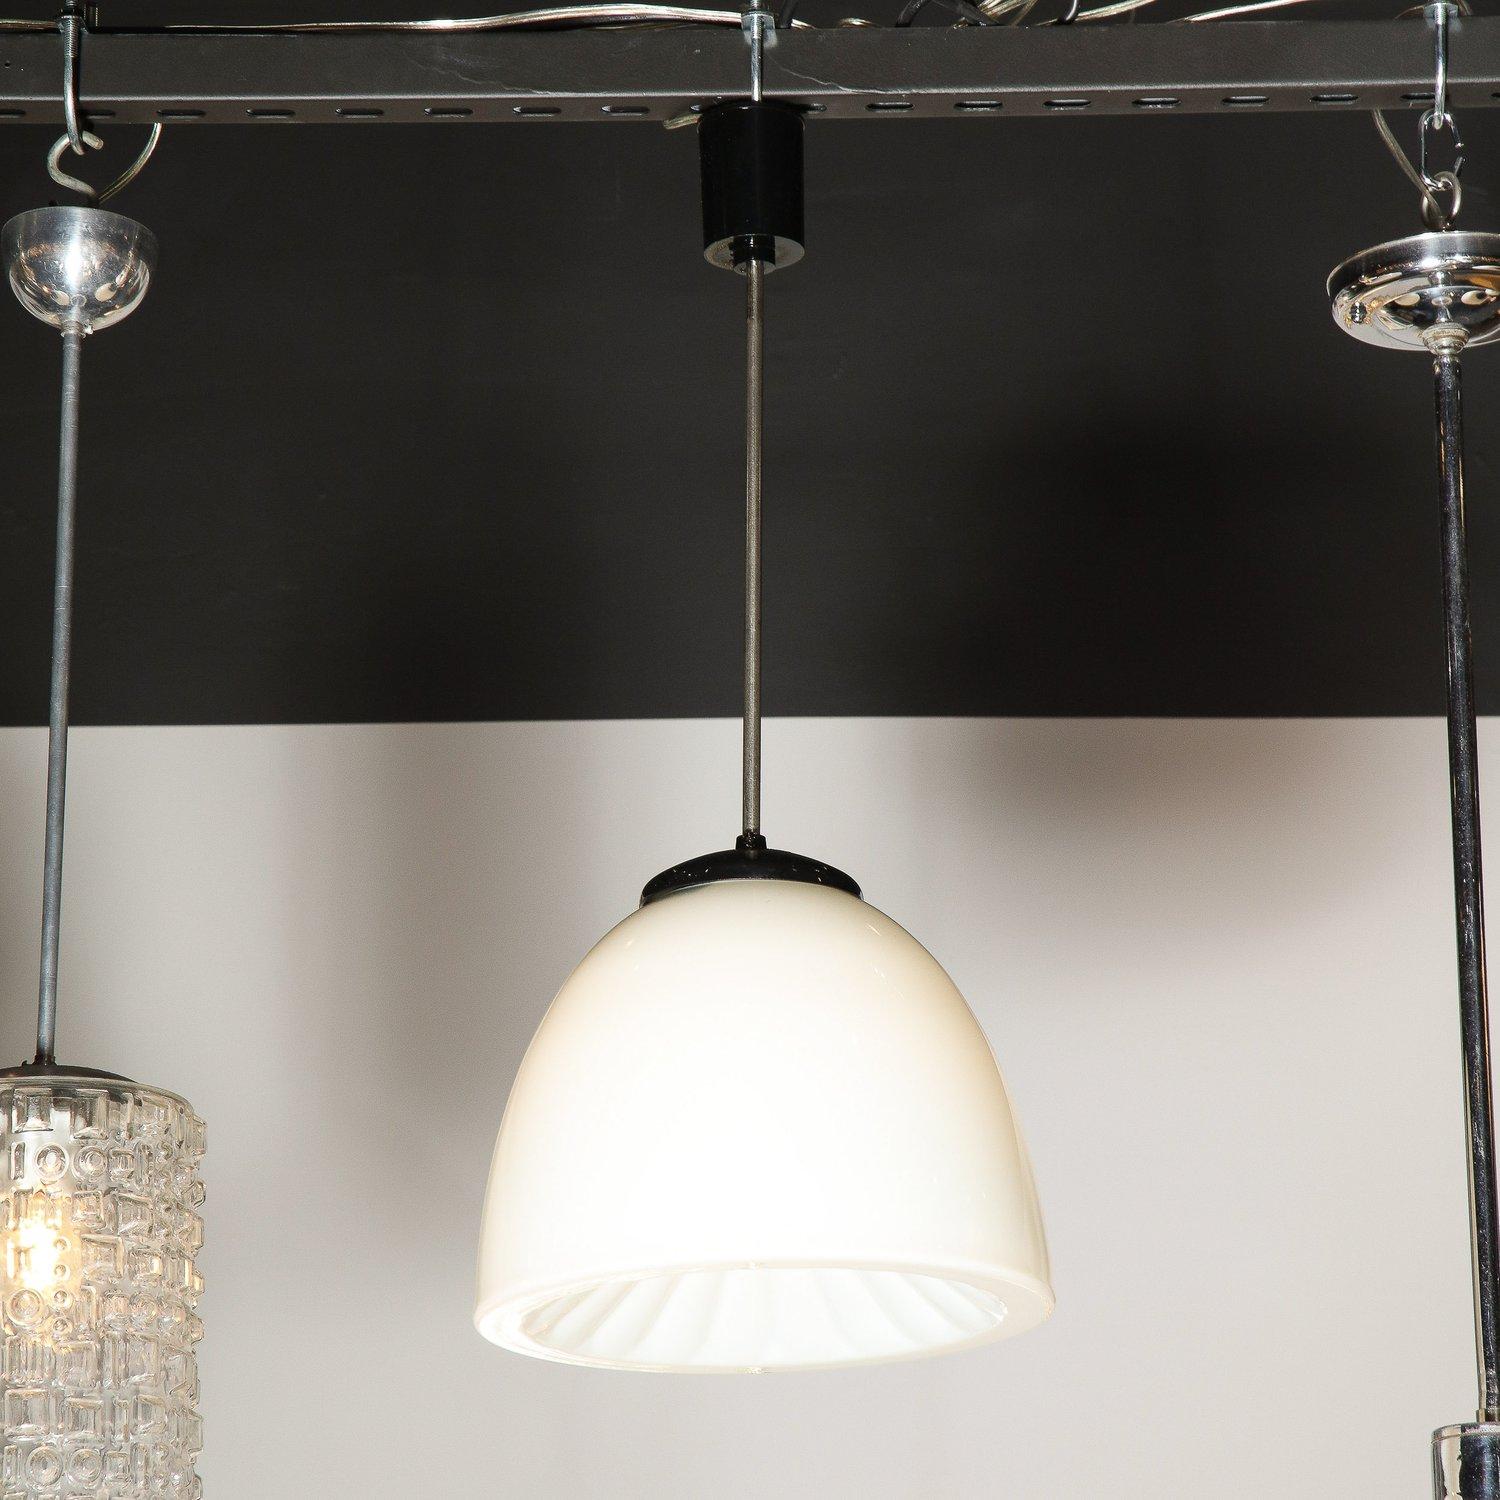 These refined and understated Mid-Century Modern pendants were realized in the Czechoslovakia, circa 1950. They feature a sculptural domed shade in opaque milk glass with dramatically concave sunburst interior striated with a wealth of channeled